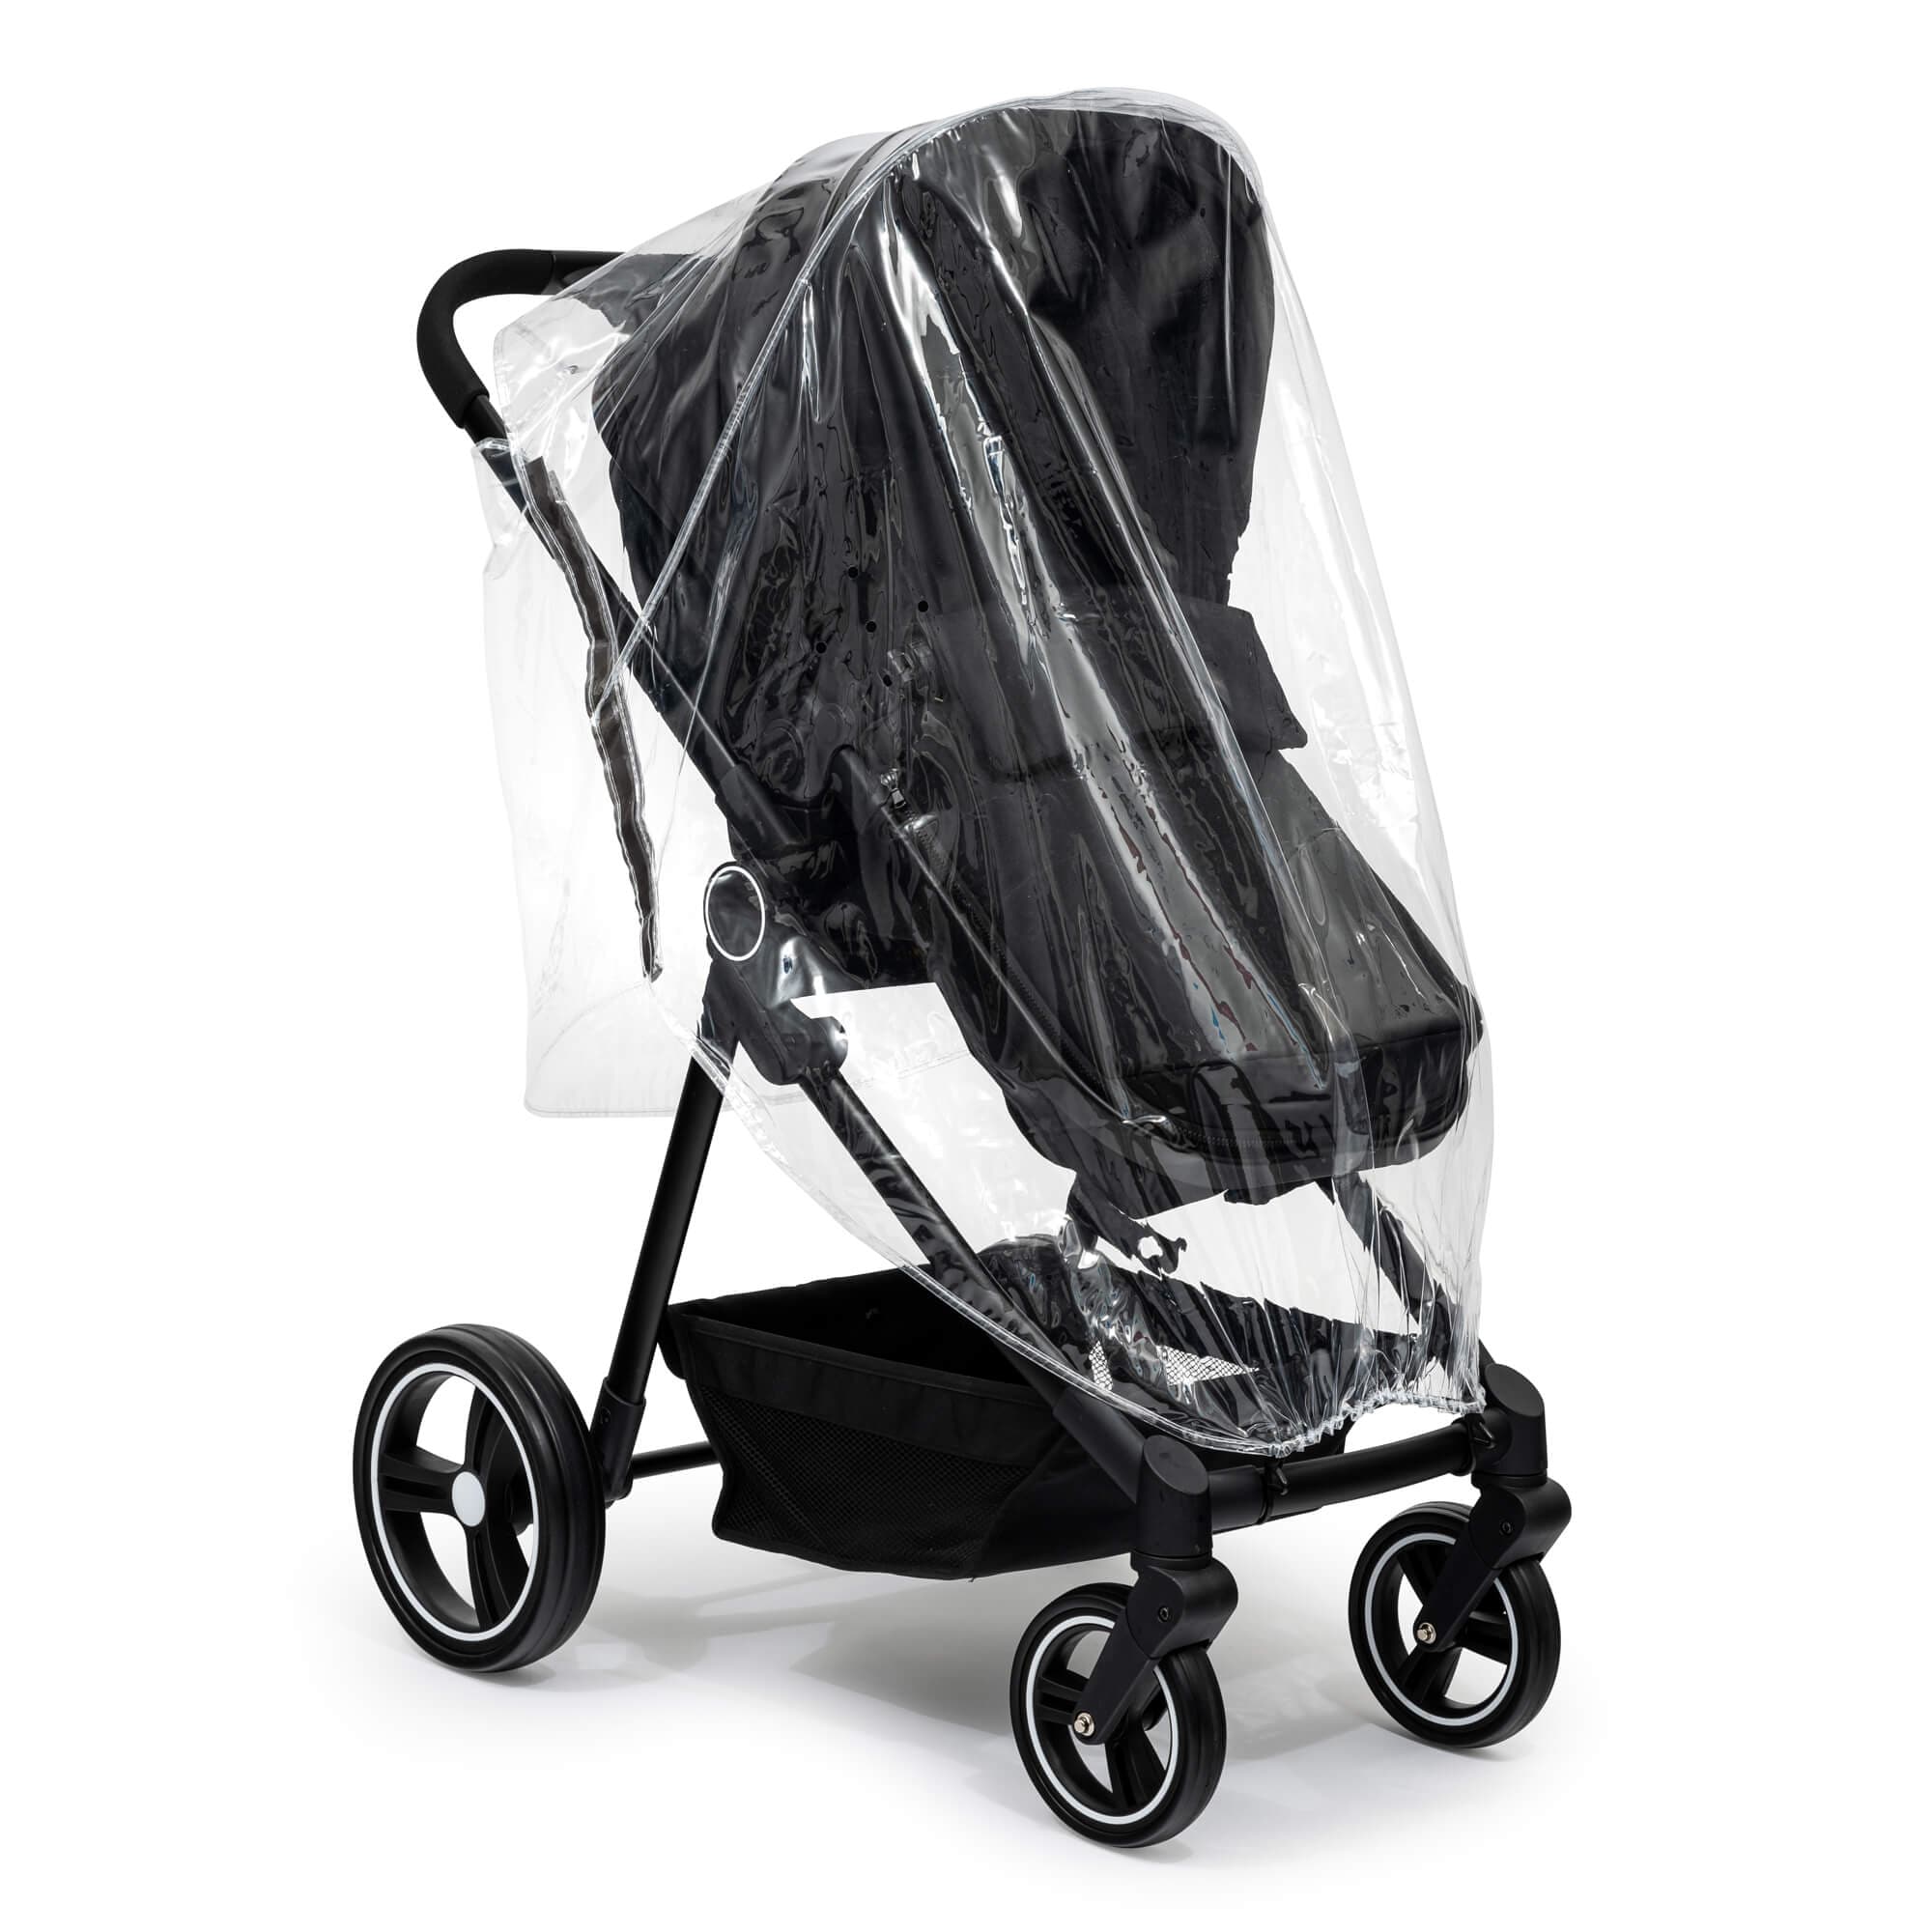 Pushchair Raincover Compatible With BabyDan - For Your Little One